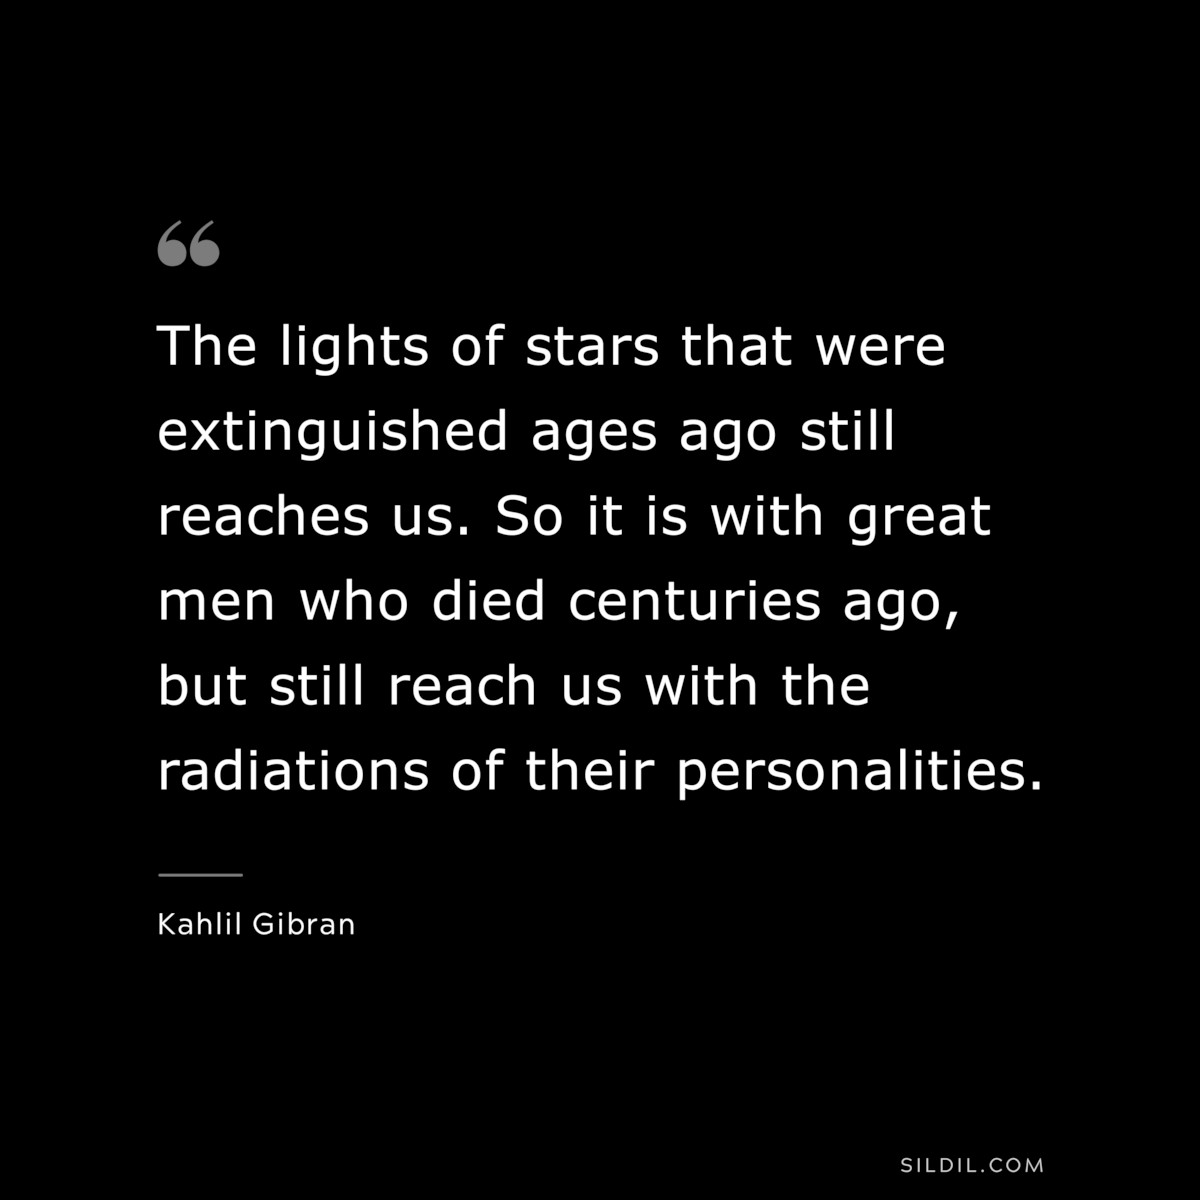 The lights of stars that were extinguished ages ago still reaches us. So it is with great men who died centuries ago, but still reach us with the radiations of their personalities. ― Kahlil Gibran